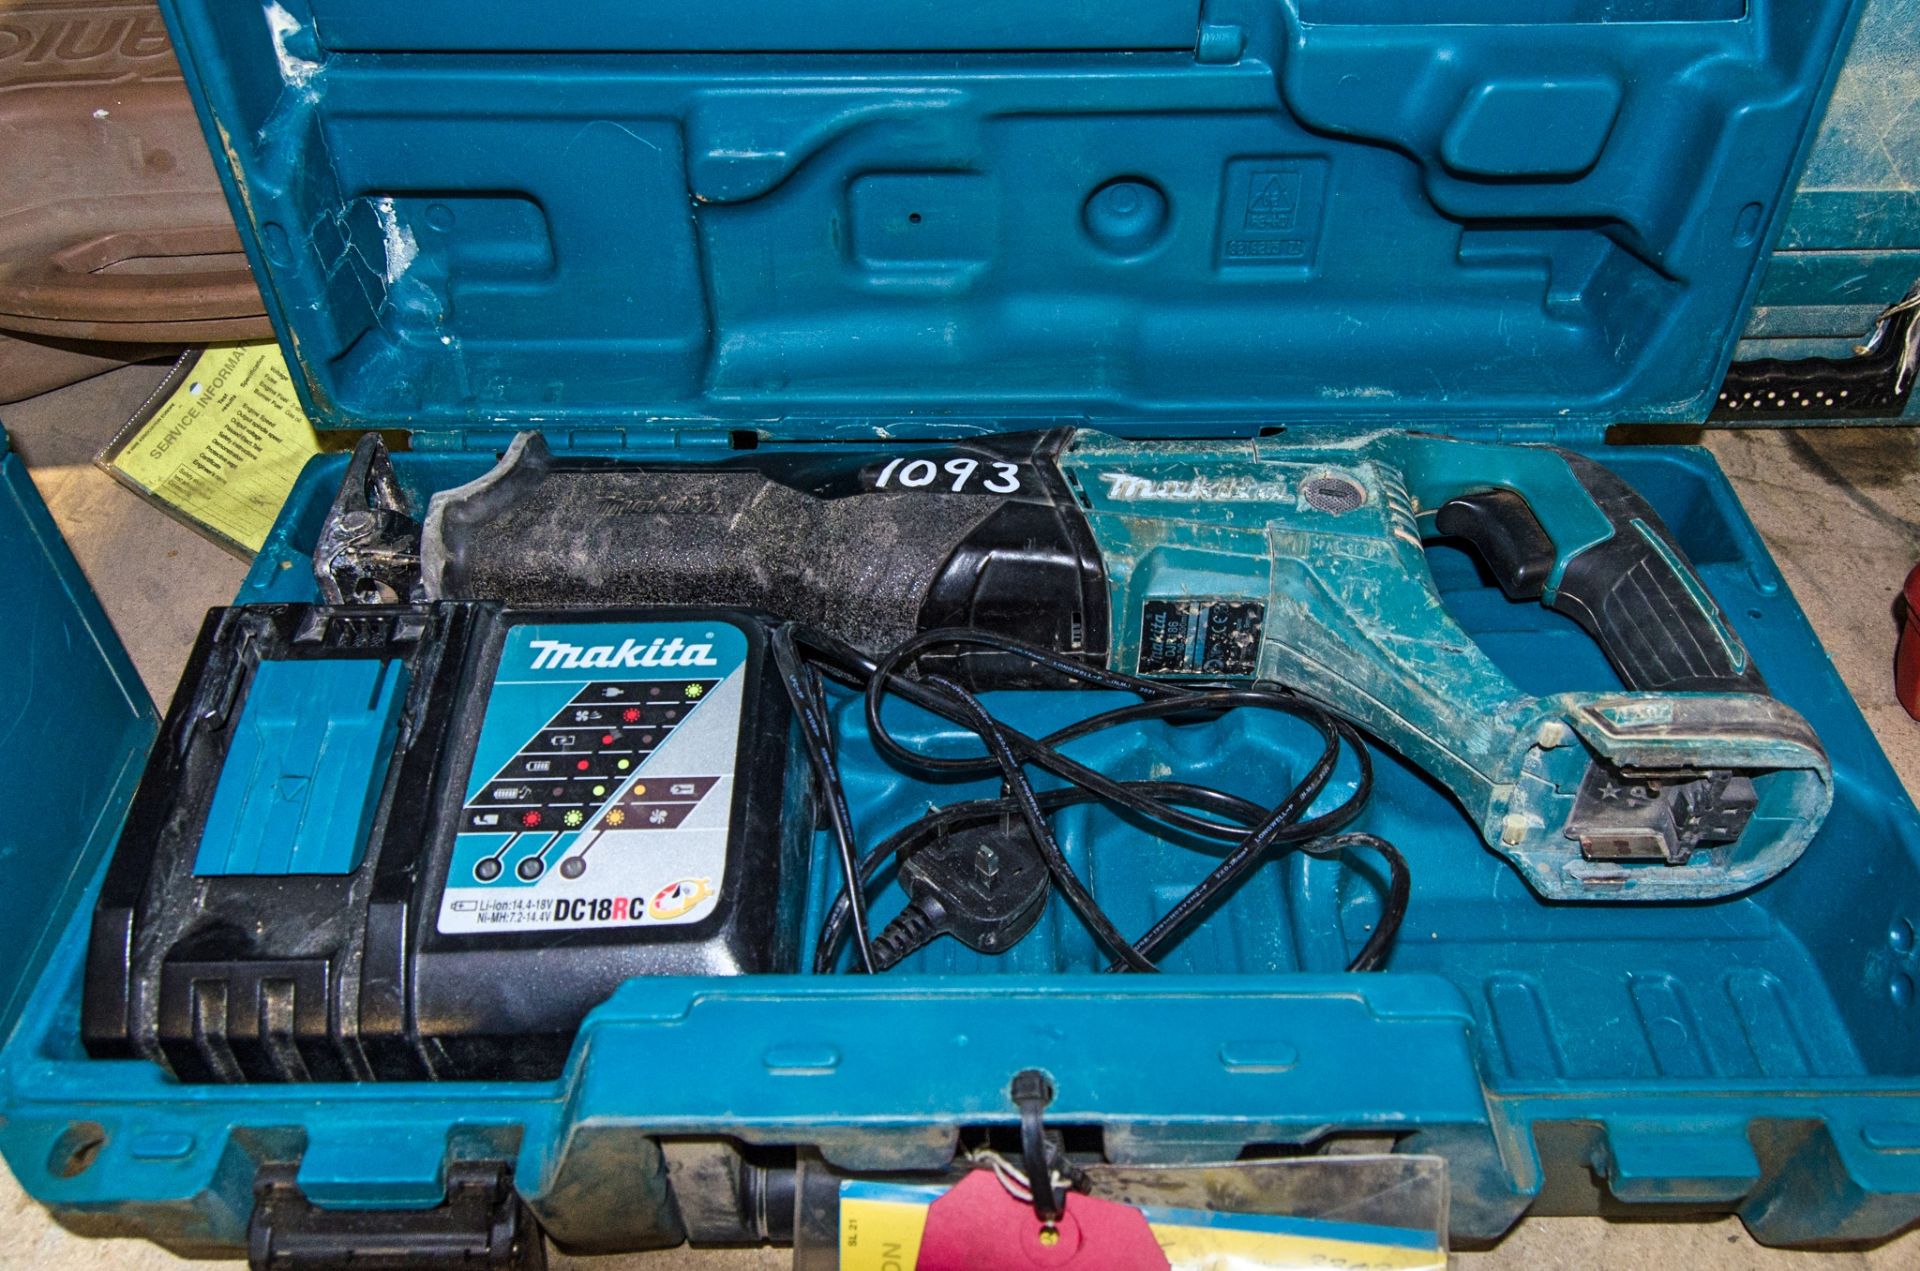 Makita DJR186 18v cordless reciprocating saw c/w charger and carry case ** No battery ** 330345